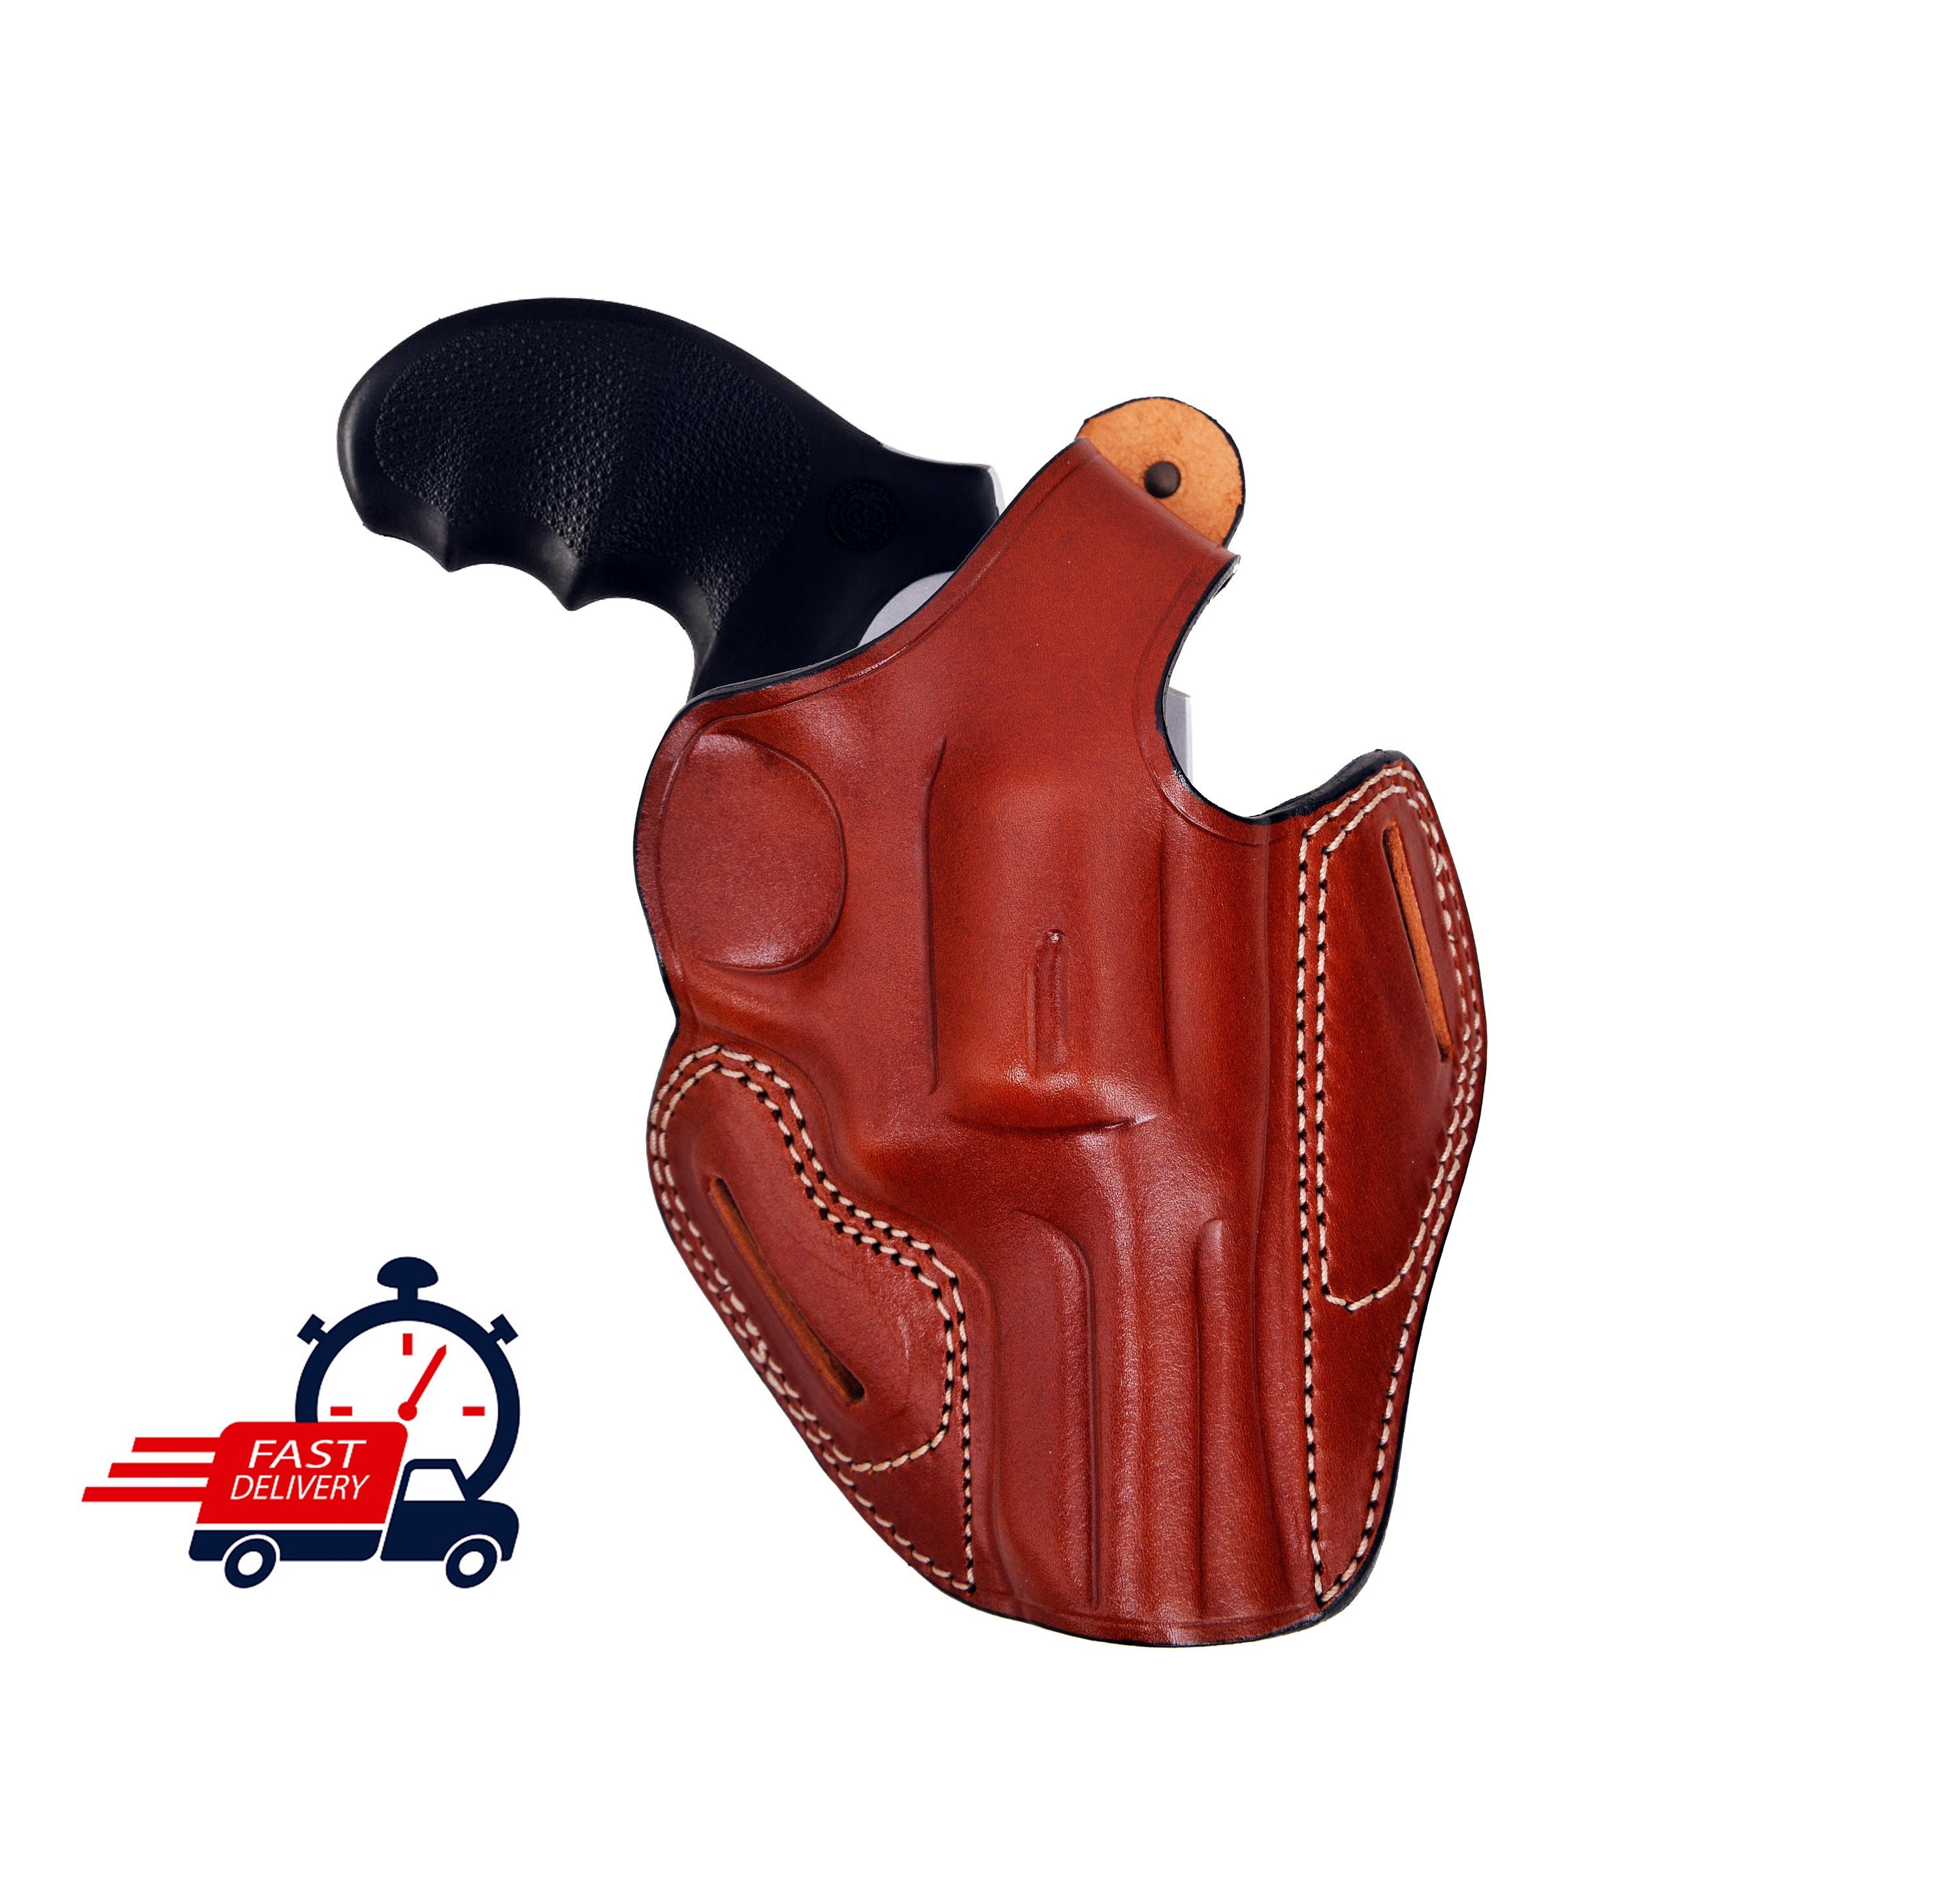  Cardini Leather - OWB Leather Holster for S&W J Frame, for  Ruger LCR and SP101, and Other 38 Special Snub Nose Revolvers up to 2.25  Barrel (Black, 642 (Left Hand